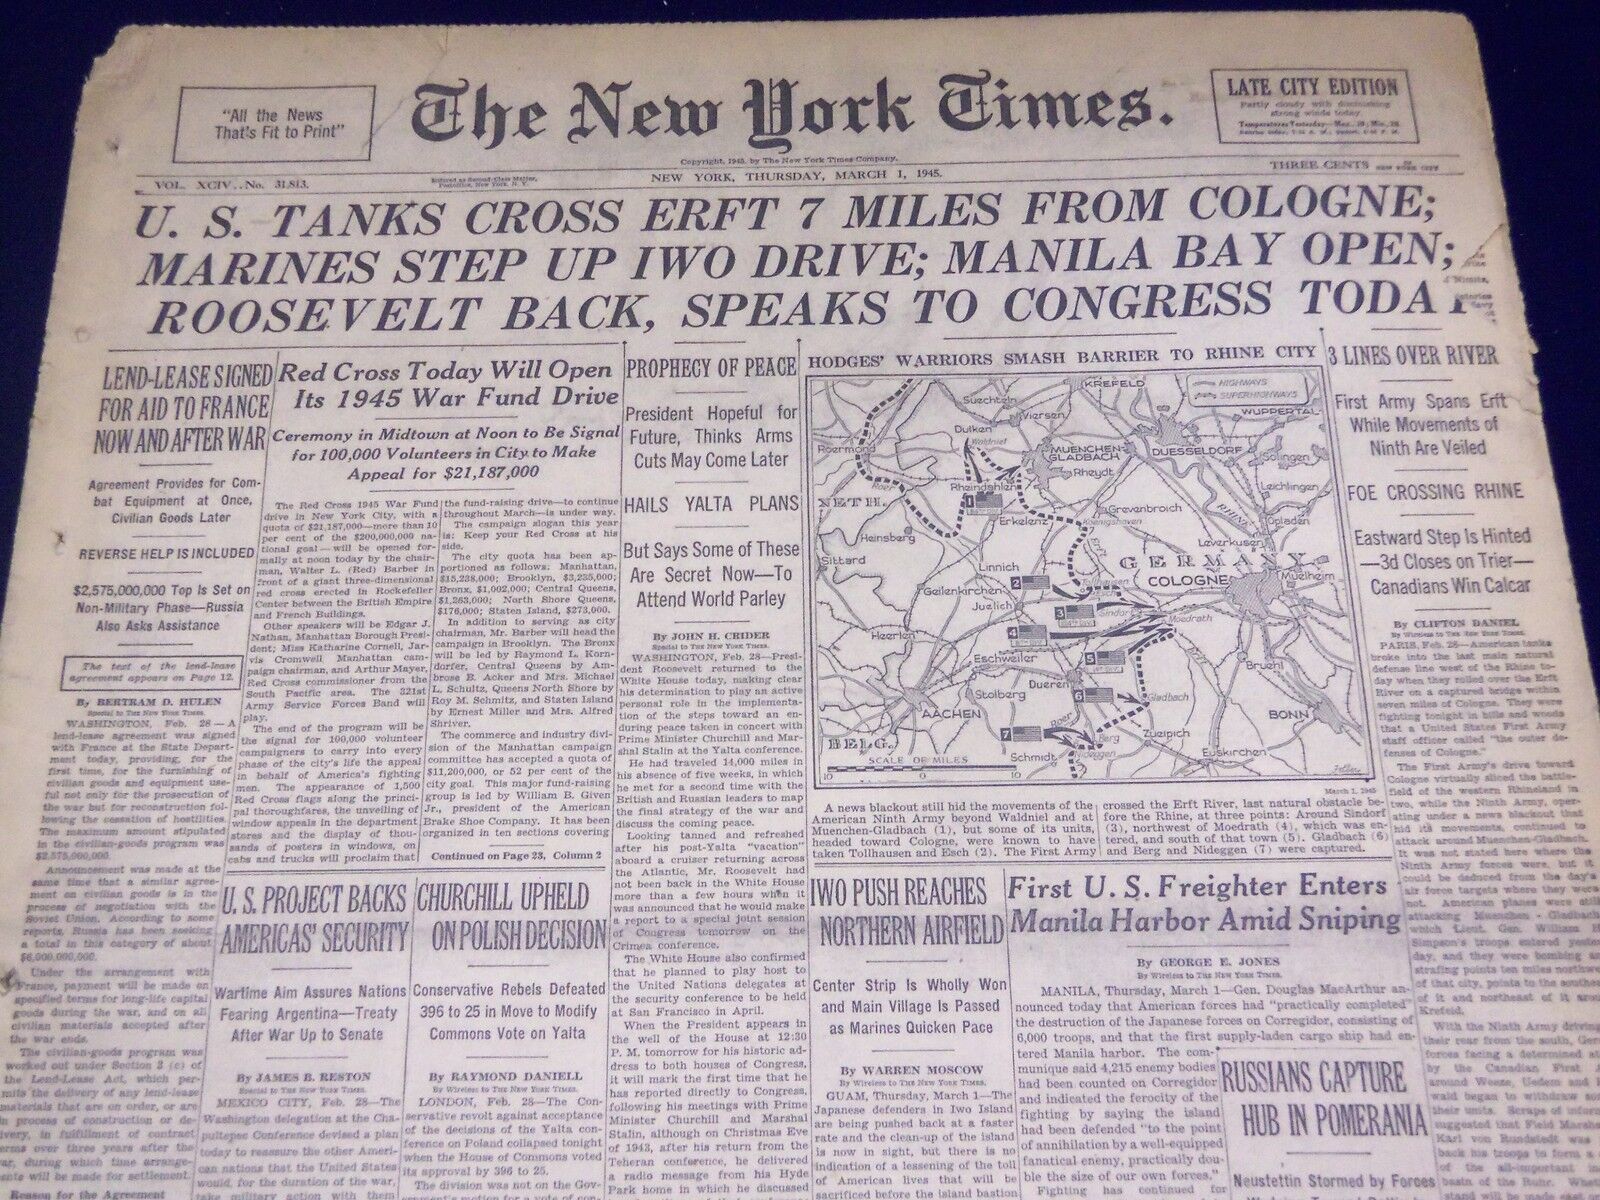 1945 MAR 1 NEW YORK TIMES - U. S. TANKS CROSS ERFT 7 MILES FROM COLOGNE - NT 551